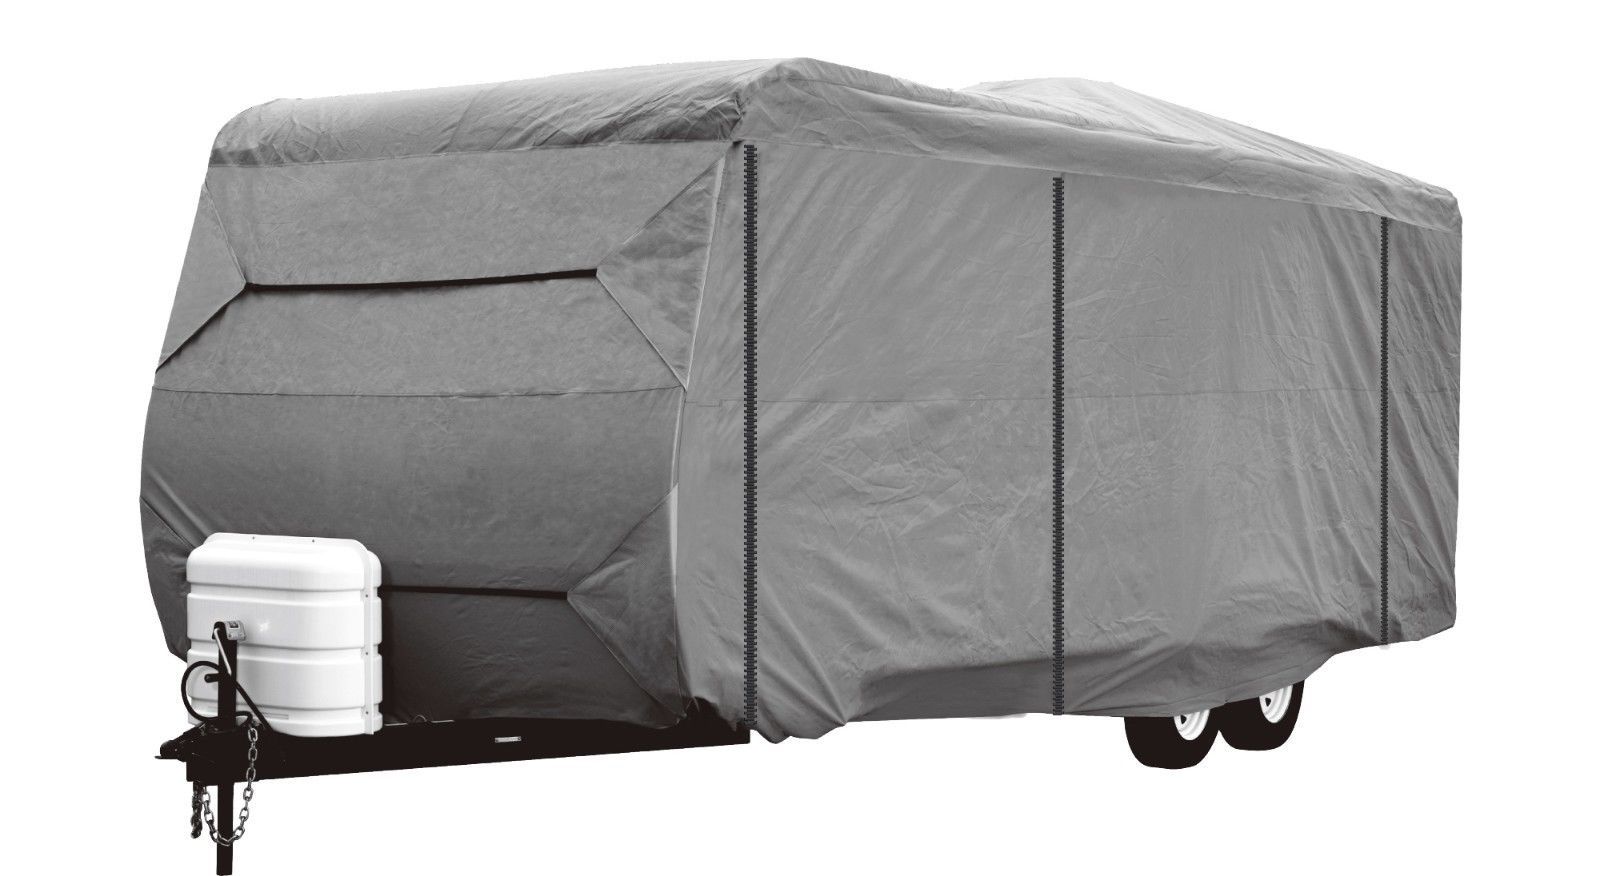 CARAVAN COVER WINTER PROTECTION WATERPROOF BREATHABLE HEAVY DUTY 4-PLY UPTO 19FT 